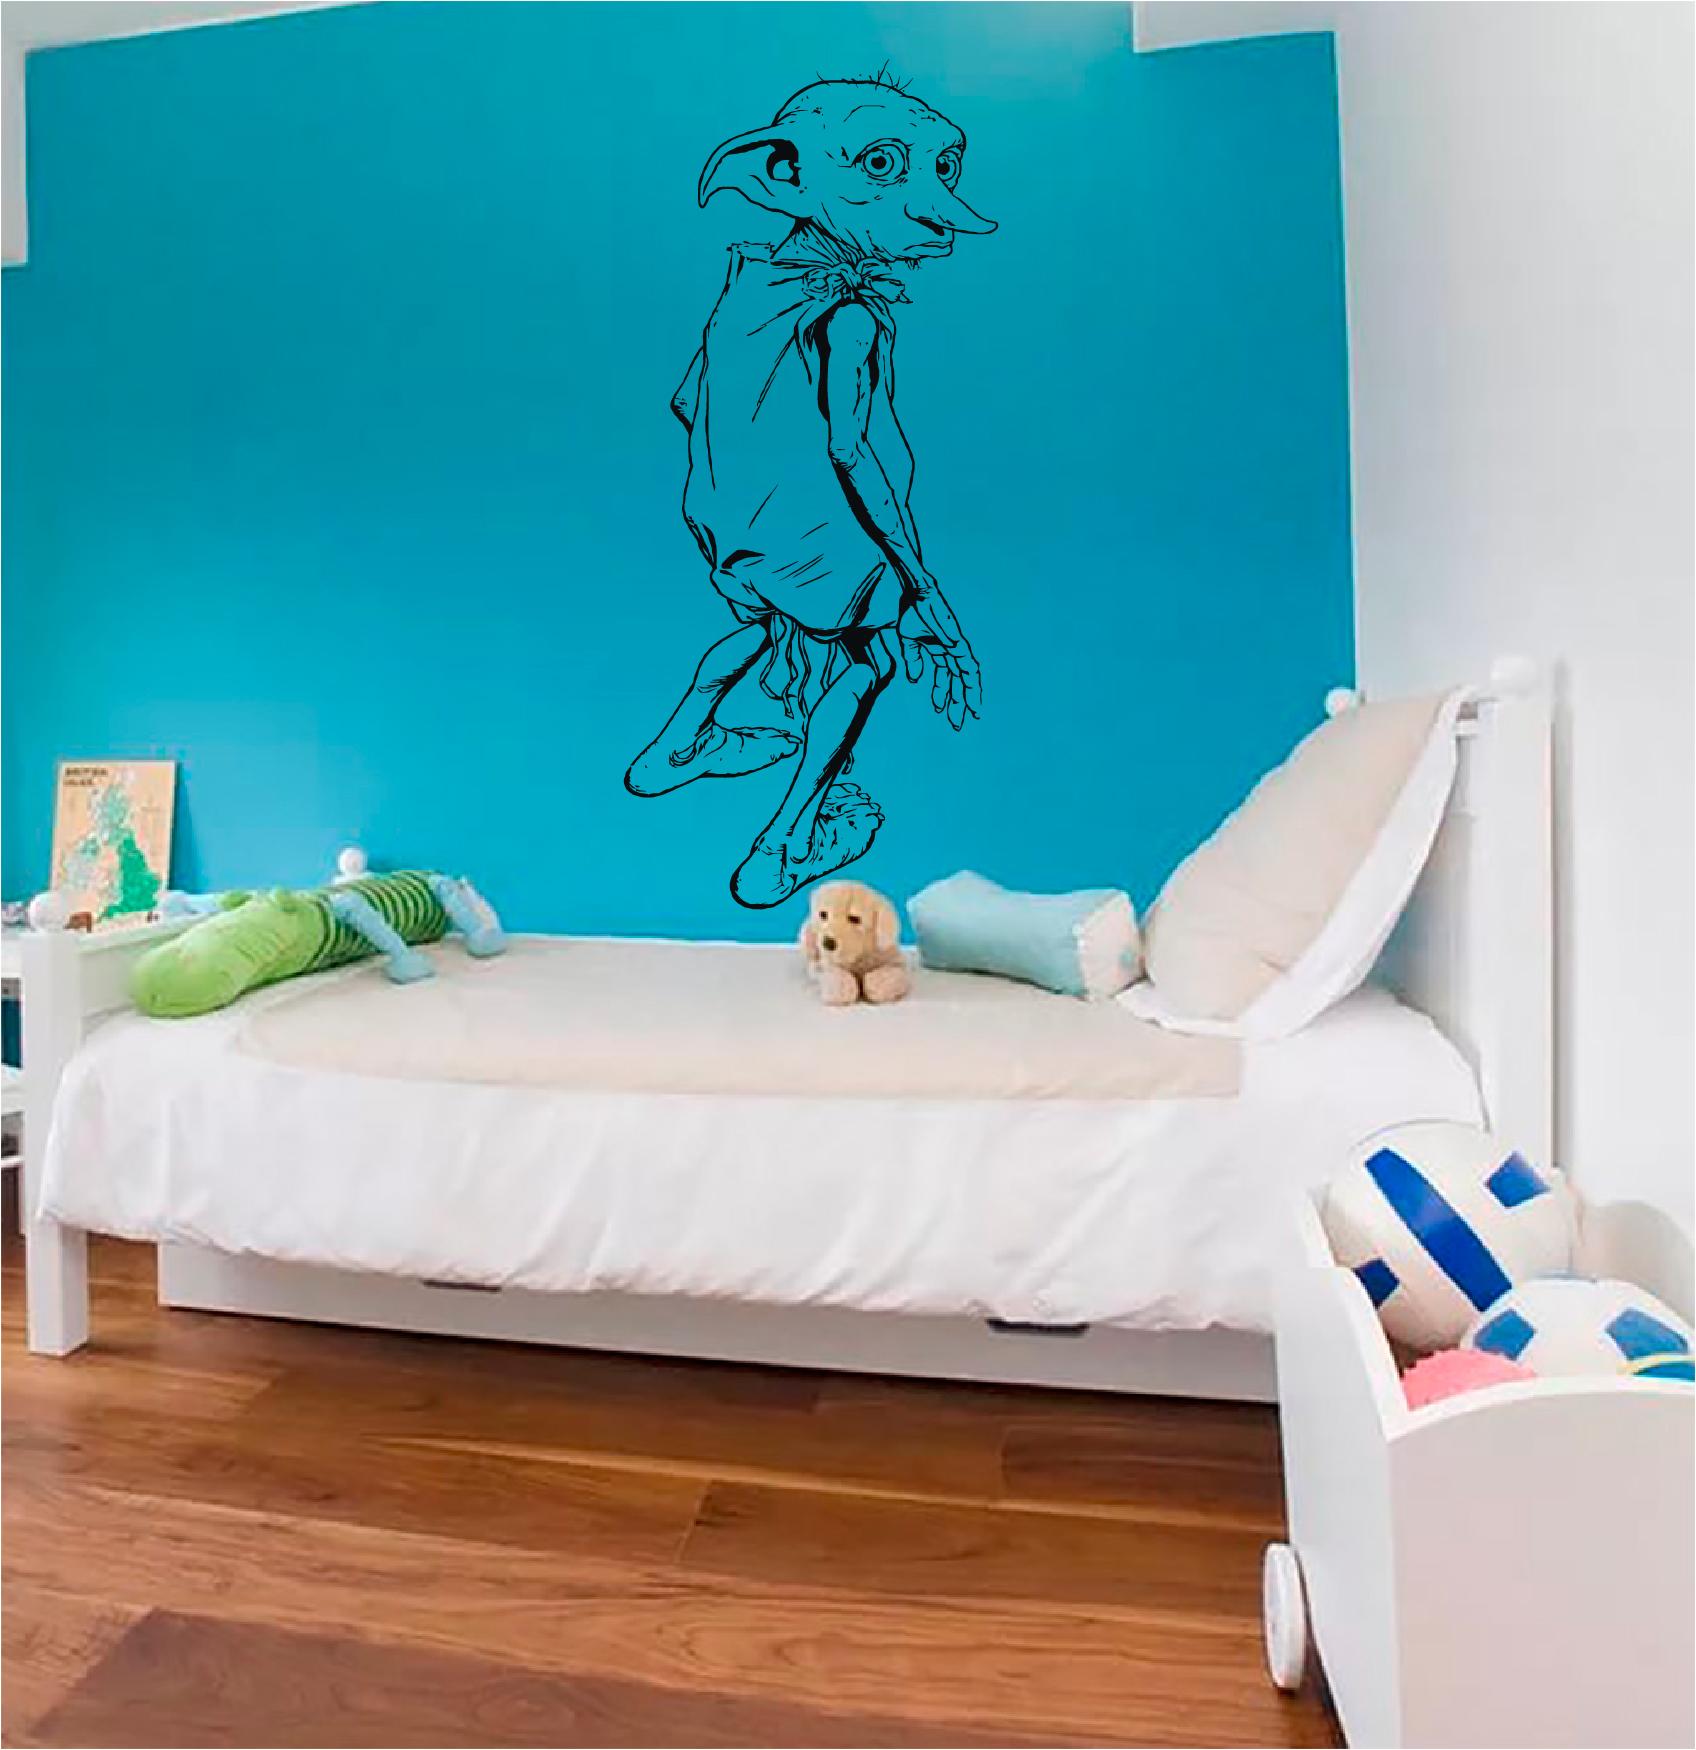 Dobby is Personage of Harry Potter Movie. Wall sticker.